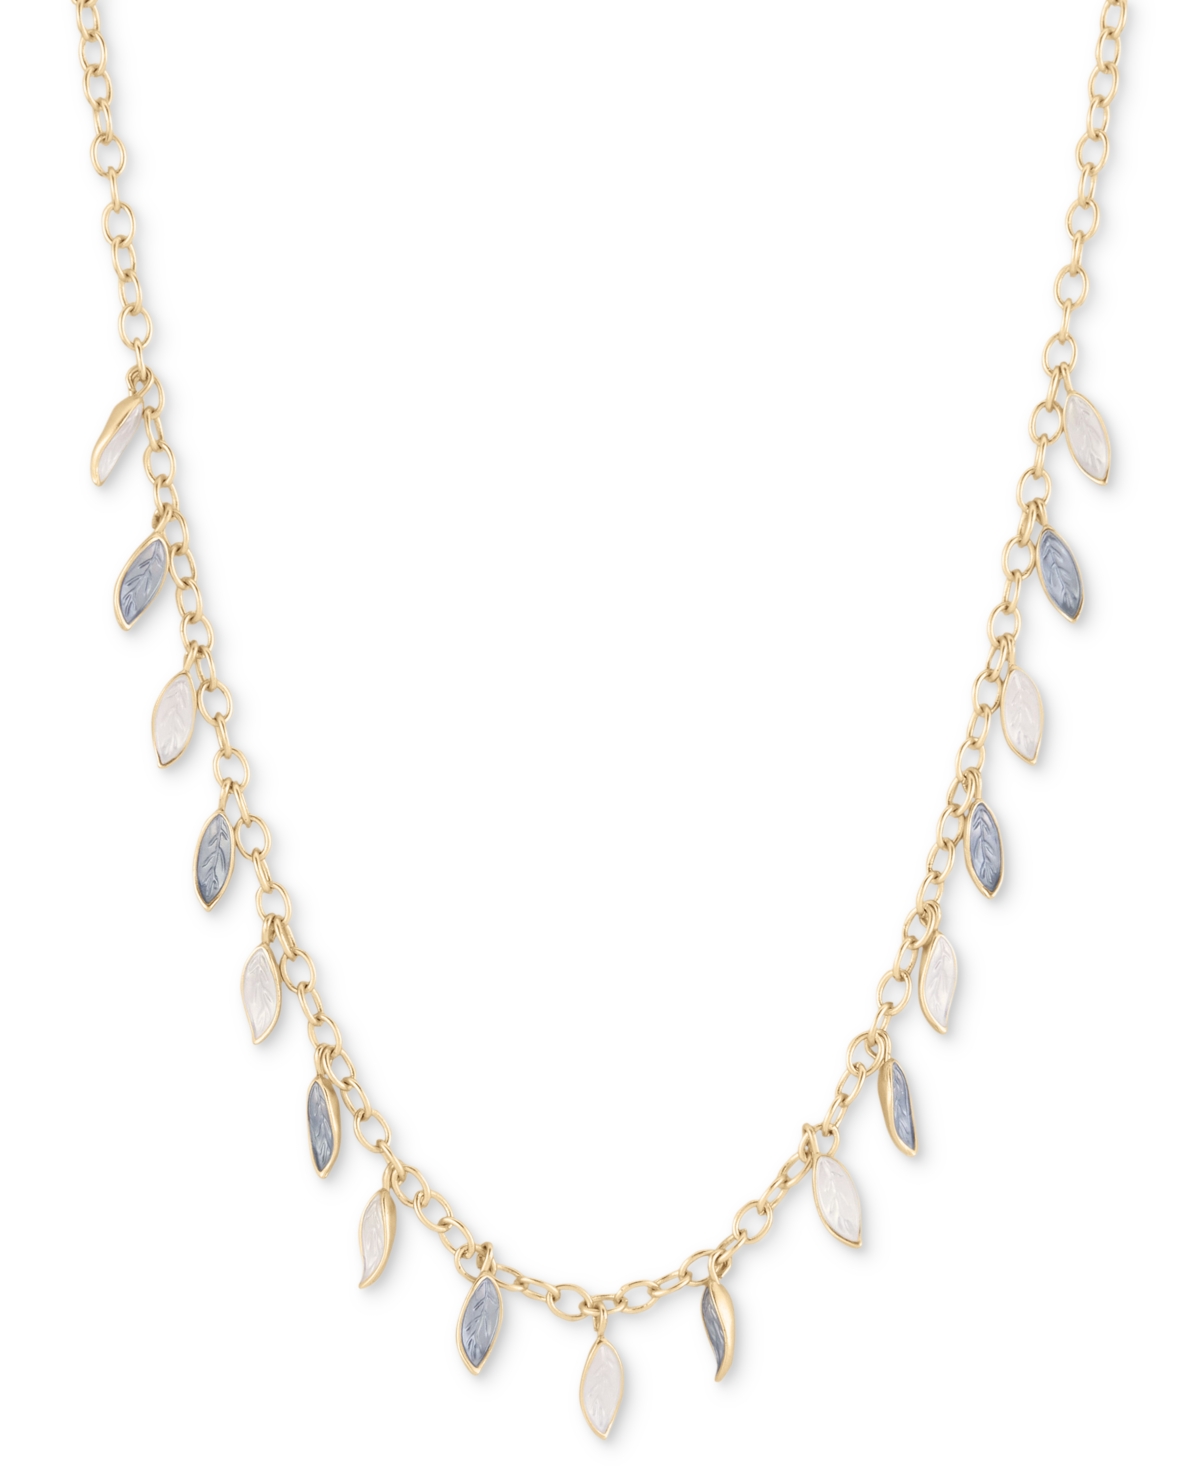 Lucky Brand Gold-tone Crystal & Color Leaf Charm Statement Necklace, 16"+ 2" Extender